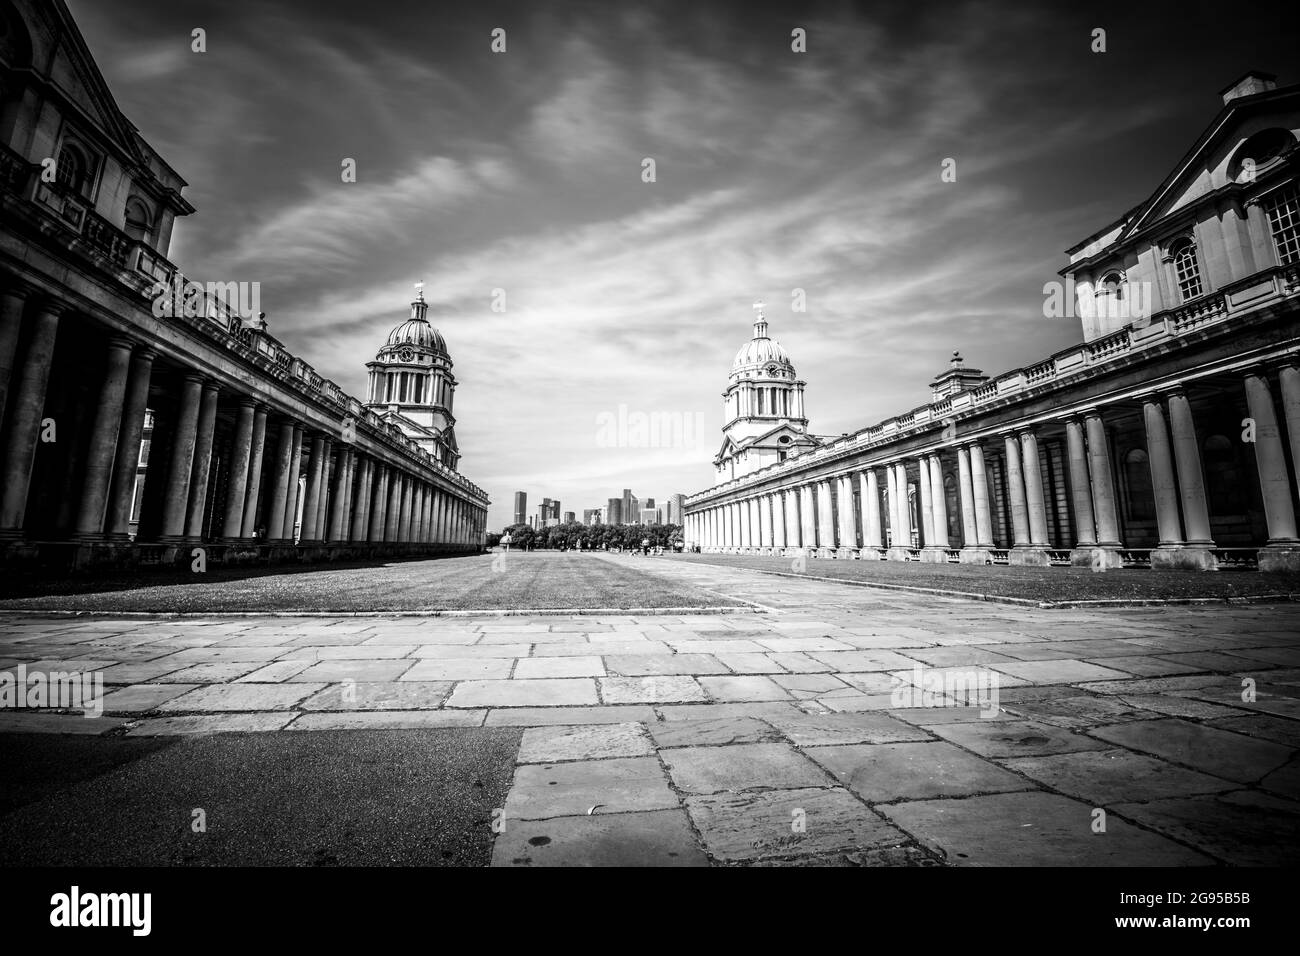 Old Royal Naval College, Greenwich. Greenwich University campus. London Stock Photo